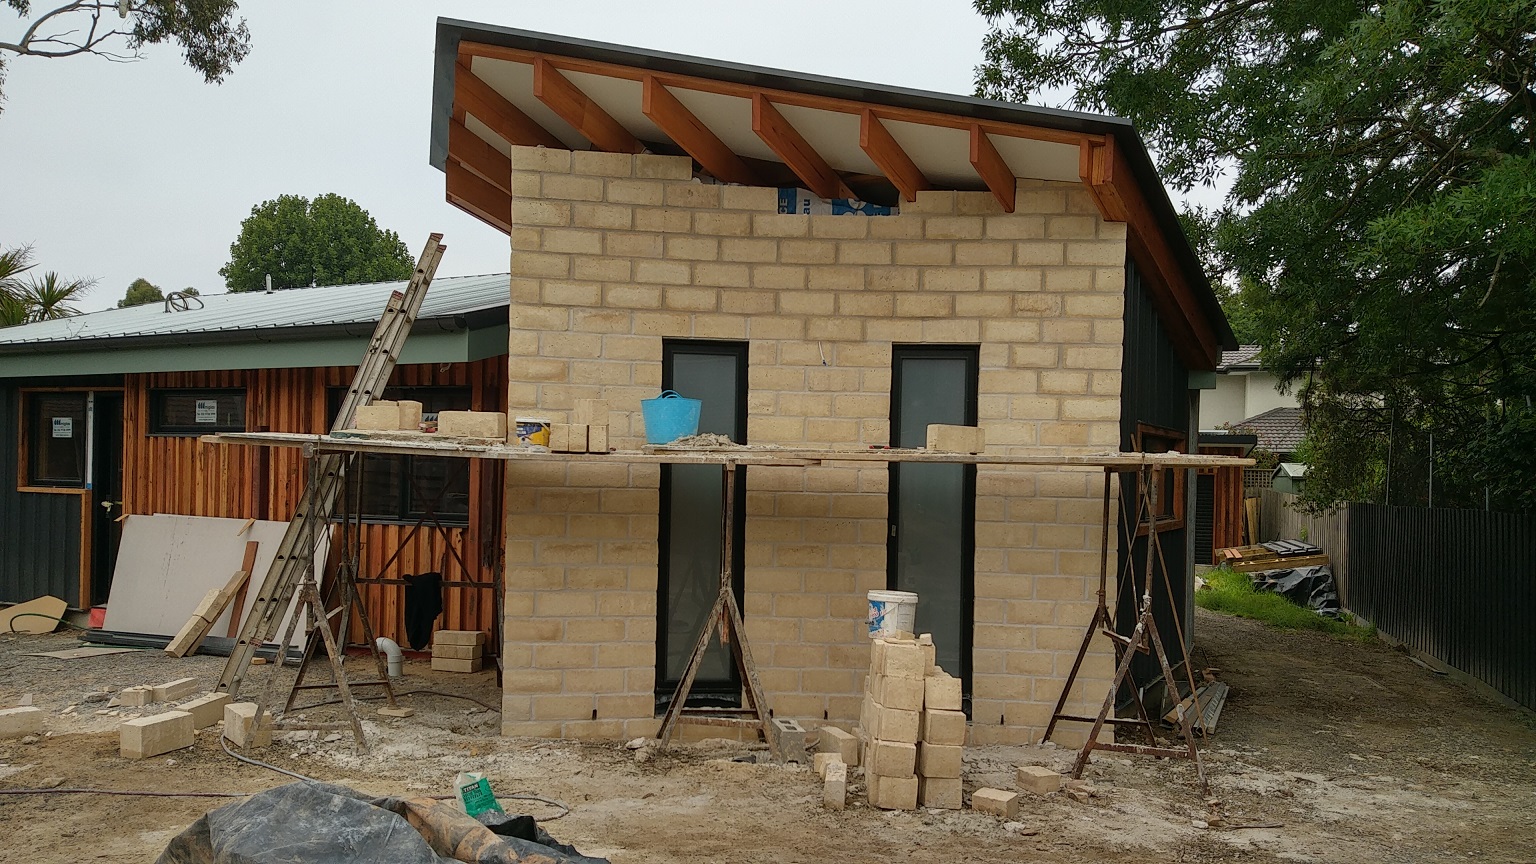 Timbercrete cladding reaches the top of the wall